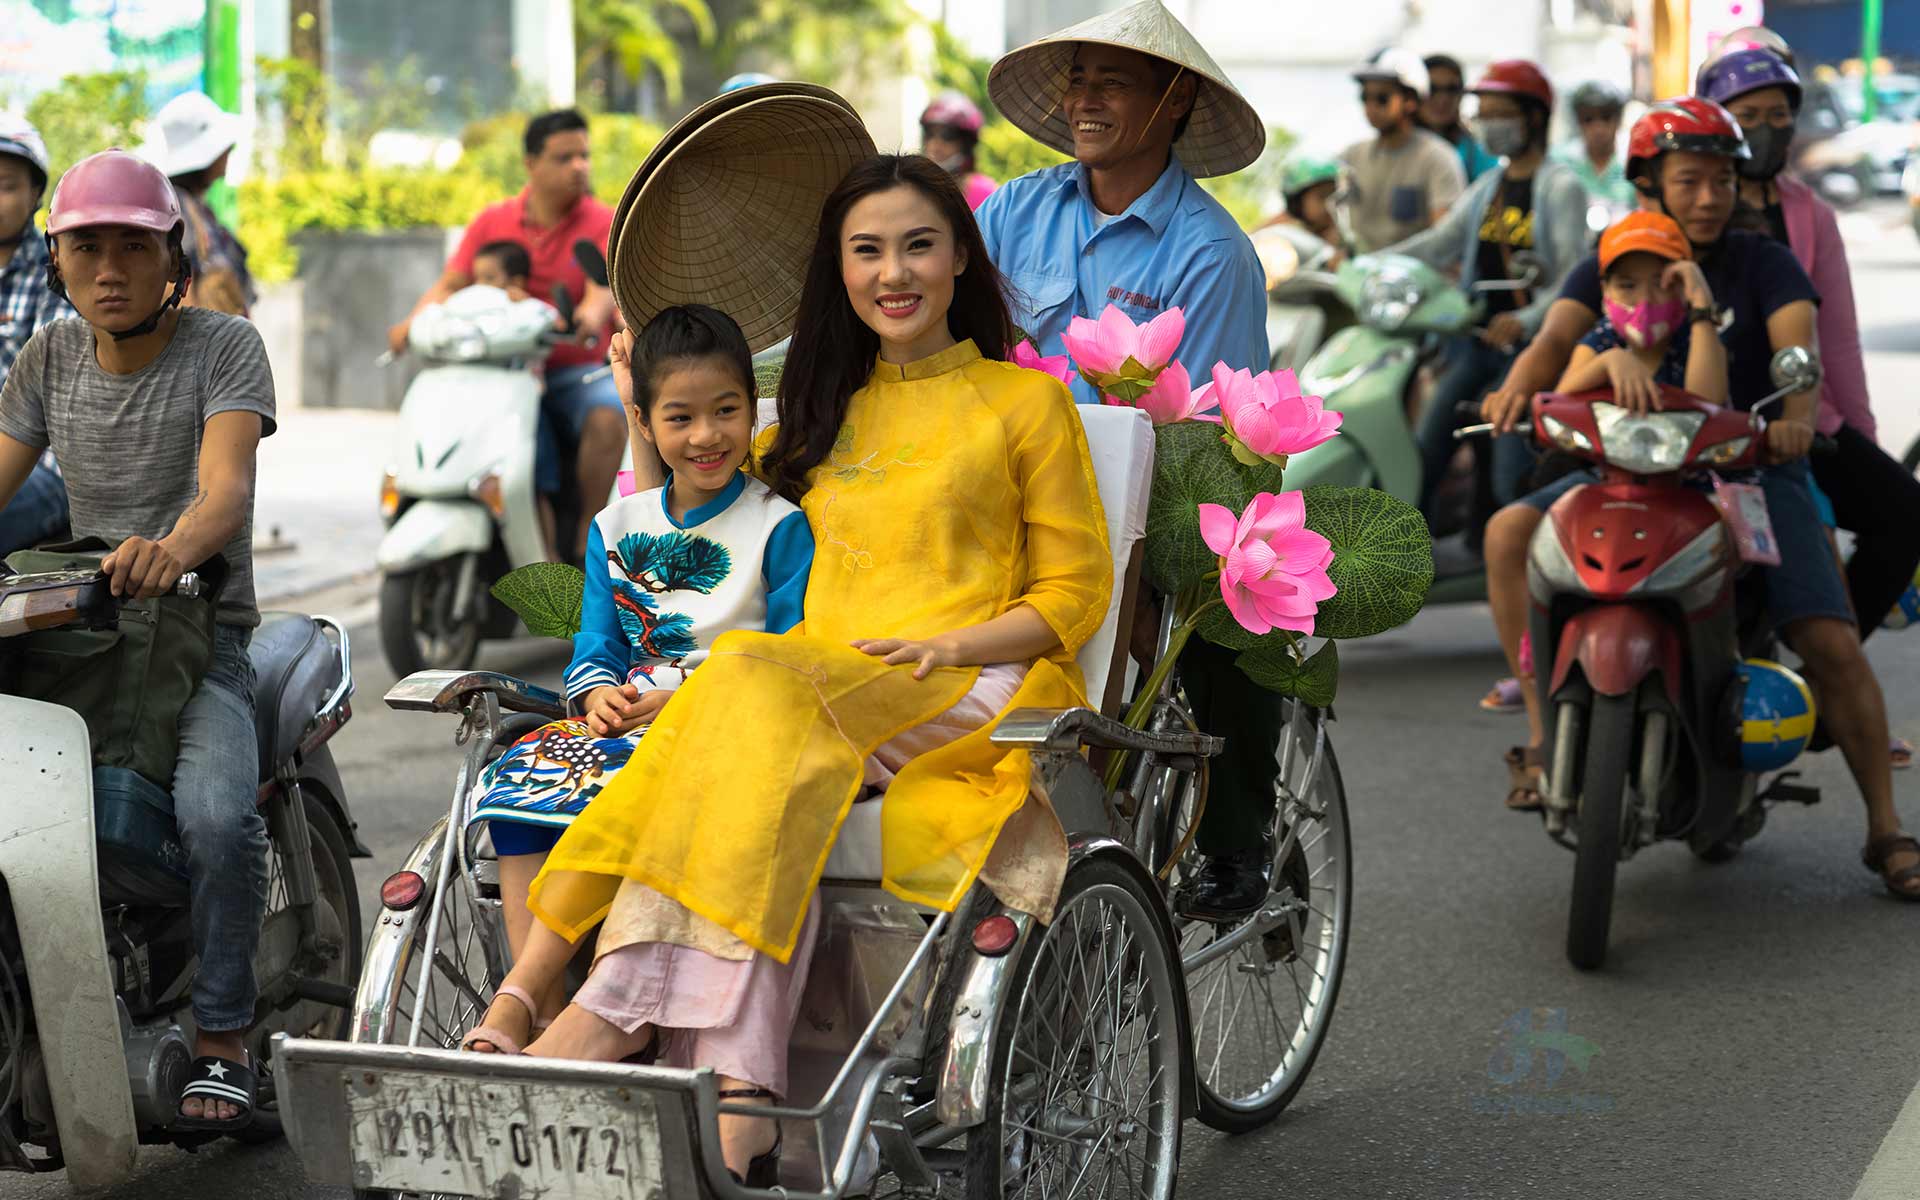 Visiting the old town by cyclo is one of the best things to do in Hanoi for kids